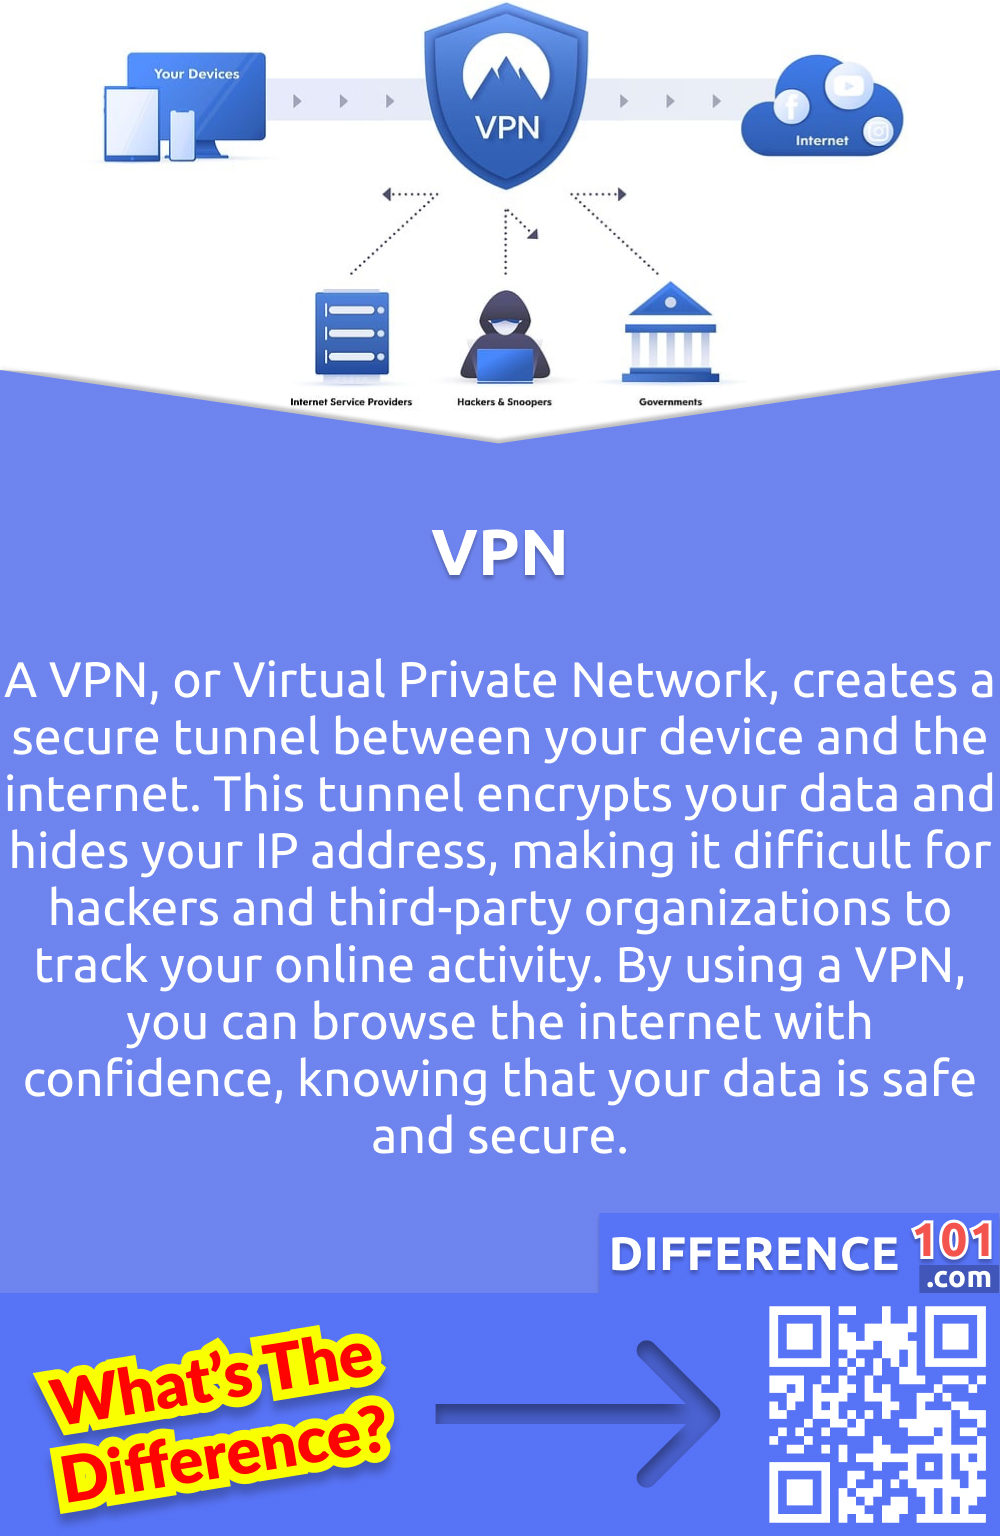 What Is VPN? A VPN, or Virtual Private Network, creates a secure tunnel between your device and the internet. This tunnel encrypts your data and hides your IP address, making it difficult for hackers and third-party organizations to track your online activity. By using a VPN, you can browse the internet with confidence, knowing that your data is safe and secure.